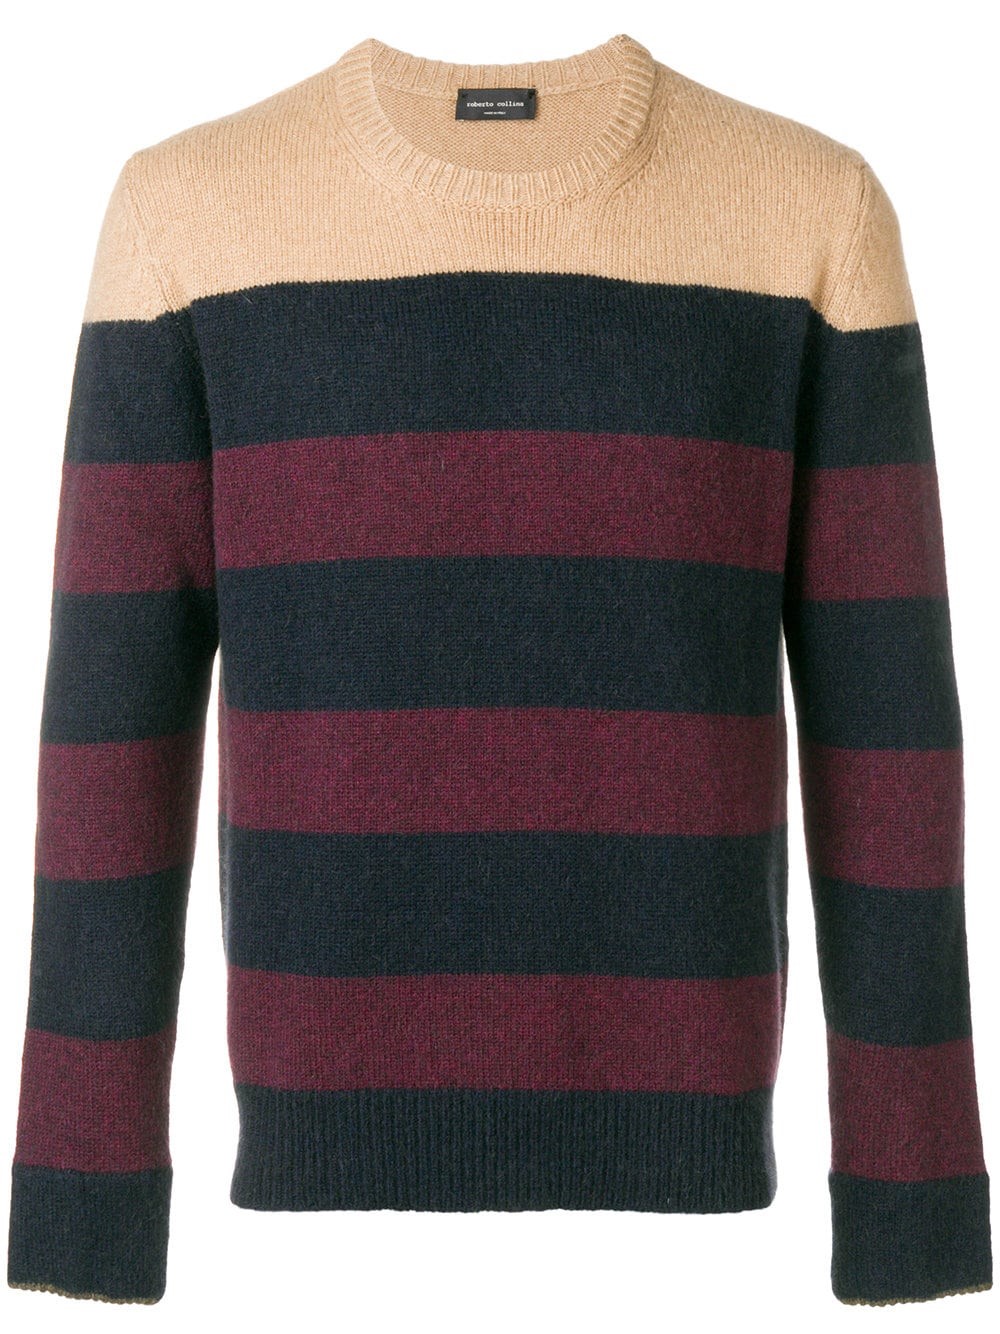 roberto collina STRIPED JUMPER available on montiboutique.com - 24275